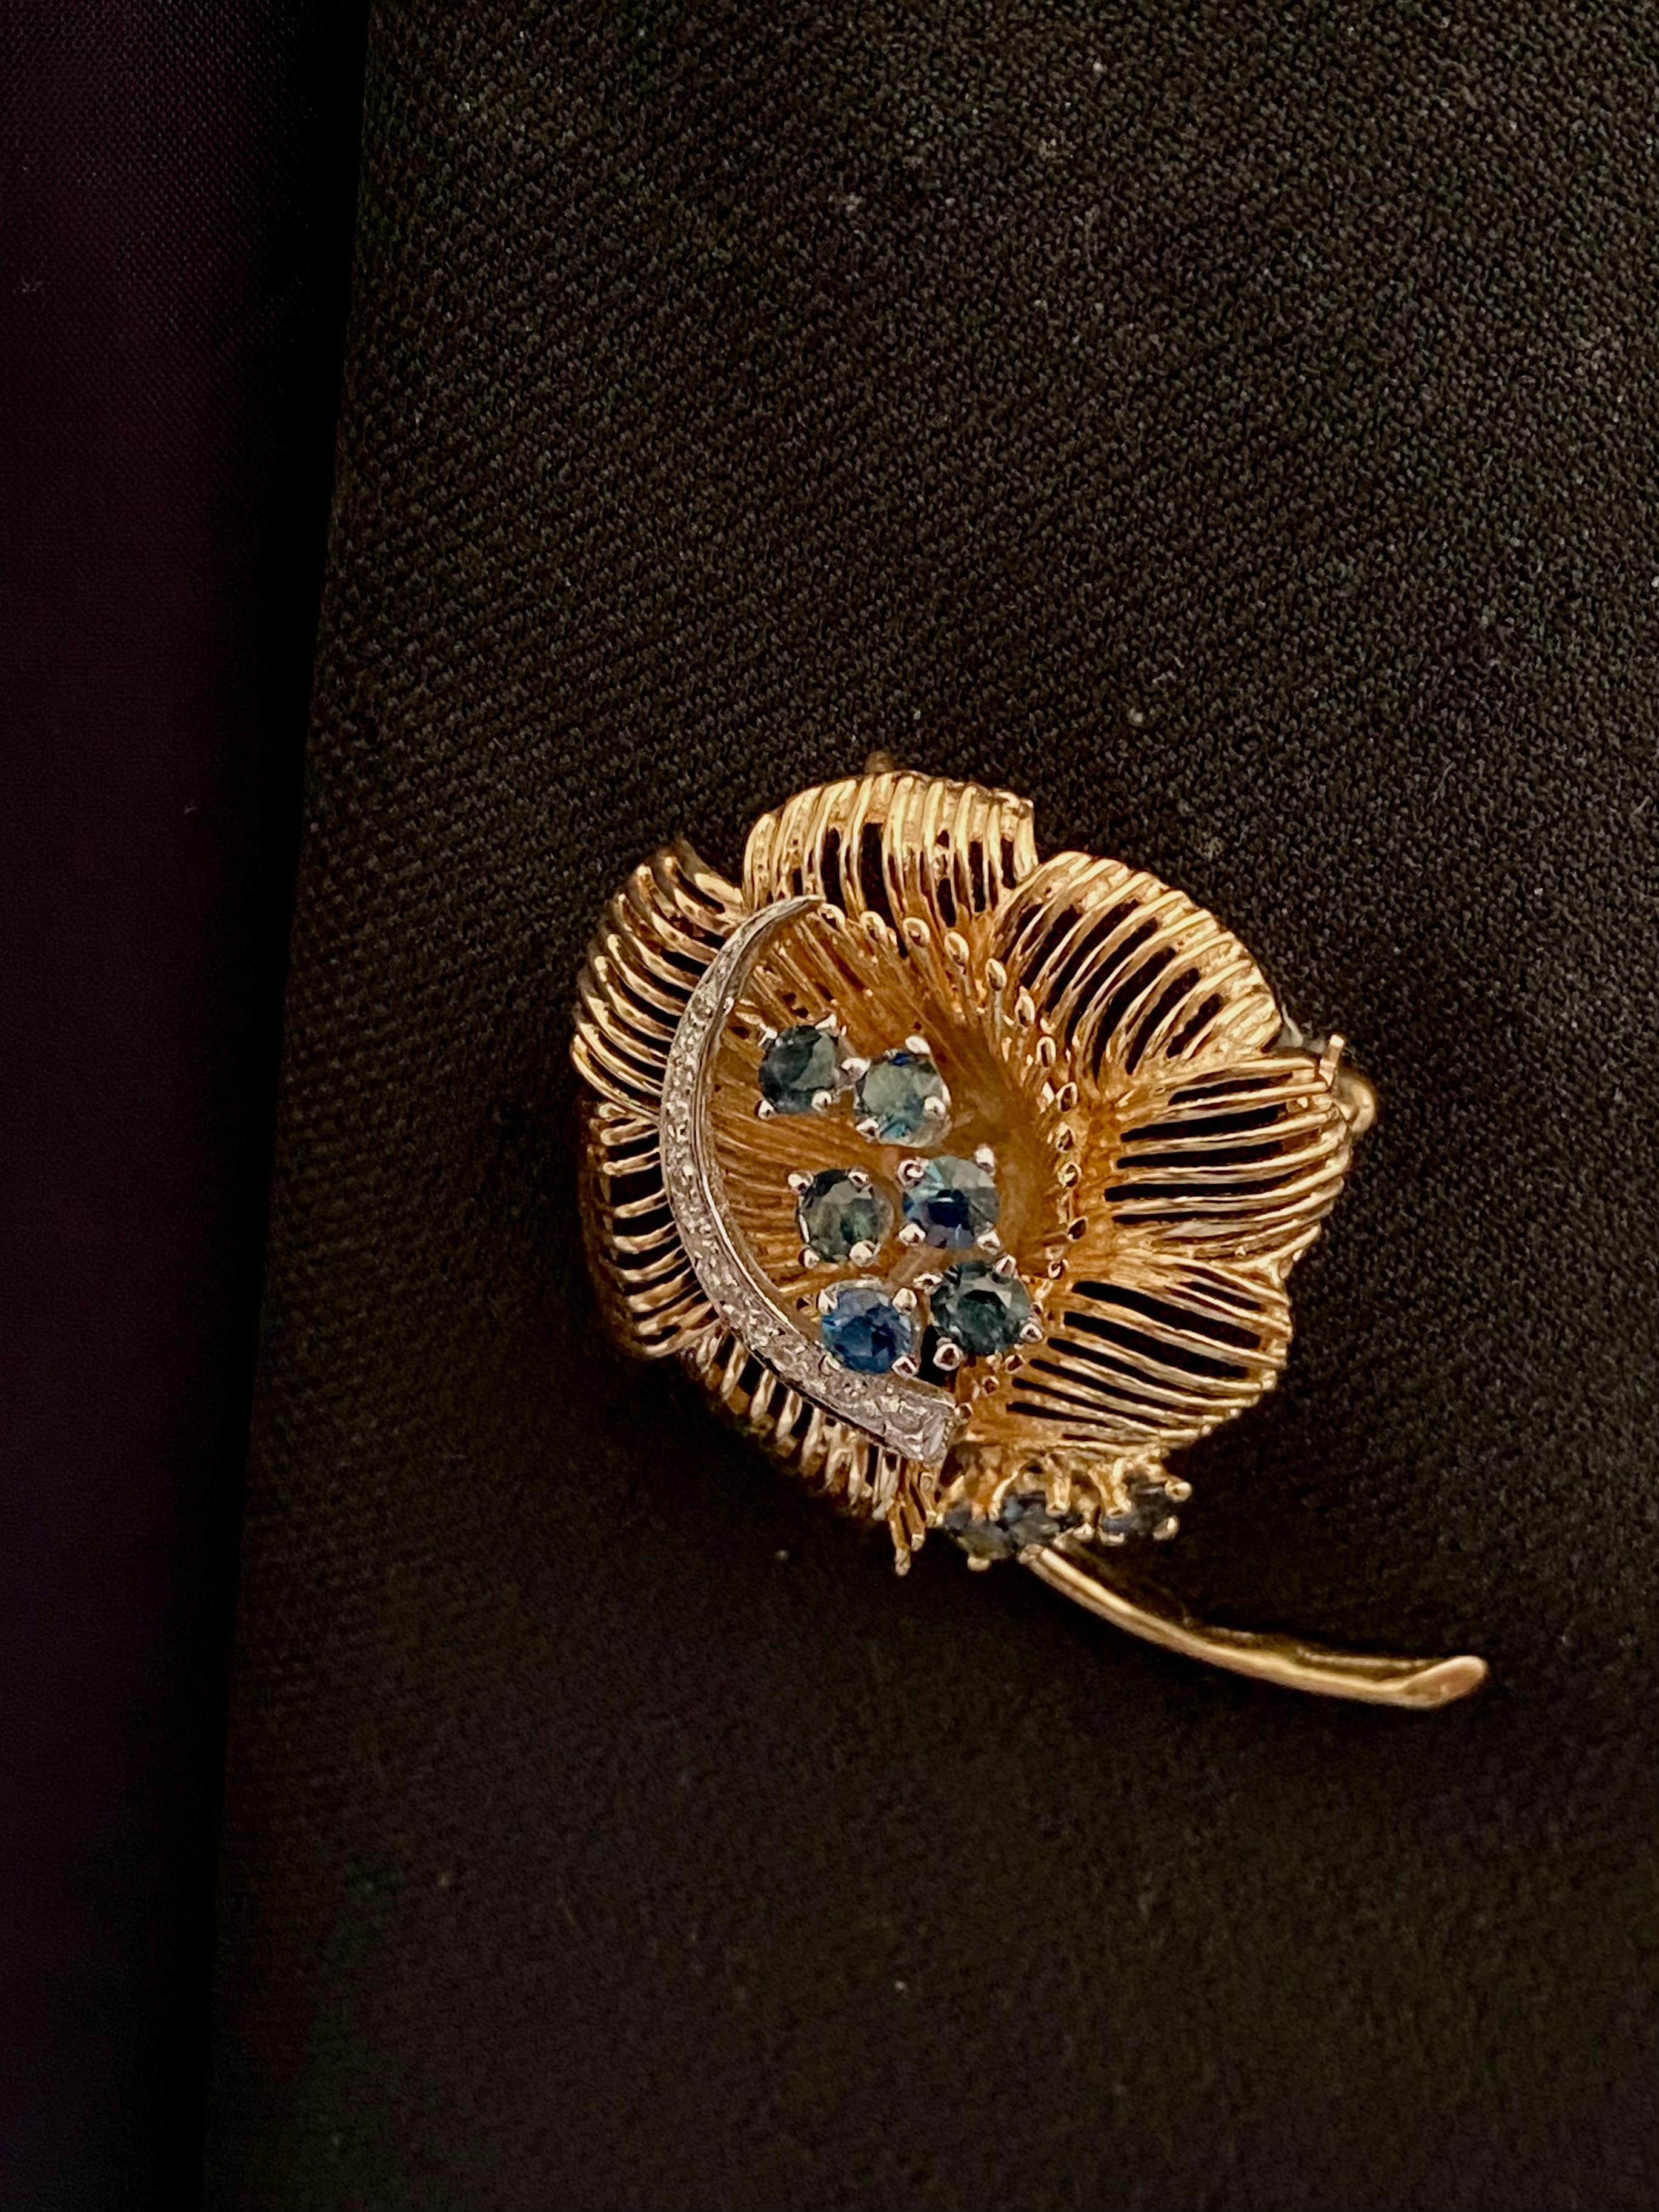 Retro Fourteen Karat Yellow Gold Floral Brooch Pendant with Diamonds and Sapphires